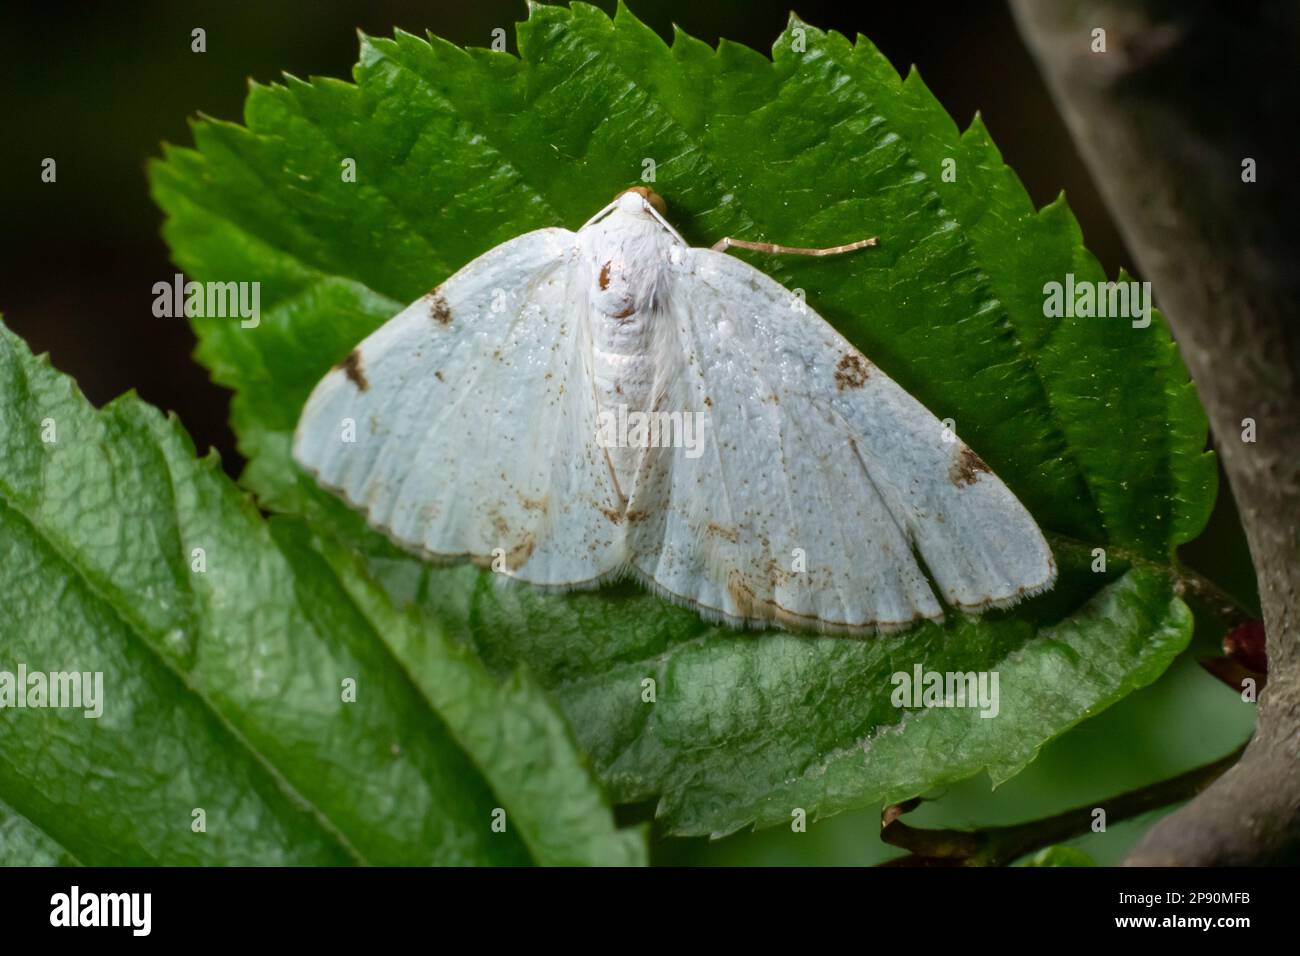 Lomographa temerata, the clouded silver, is a moth of the family Geometridae. Clouded silver moth, Lomographa temerata, from above. Stock Photo